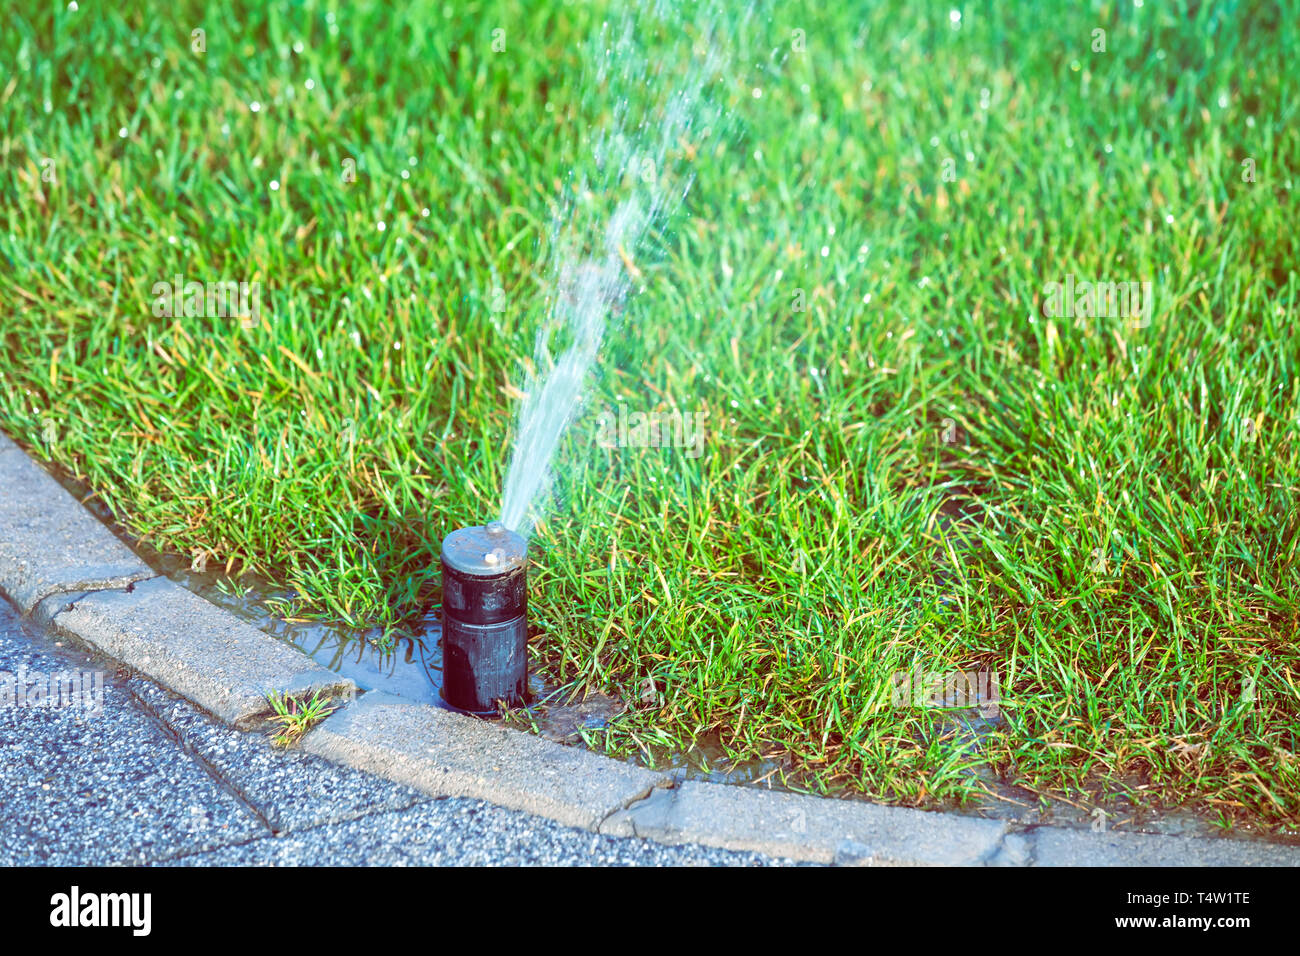 Sprinkler system work in lawn, tosses water in the air through its water  nozzle Stock Photo - Alamy